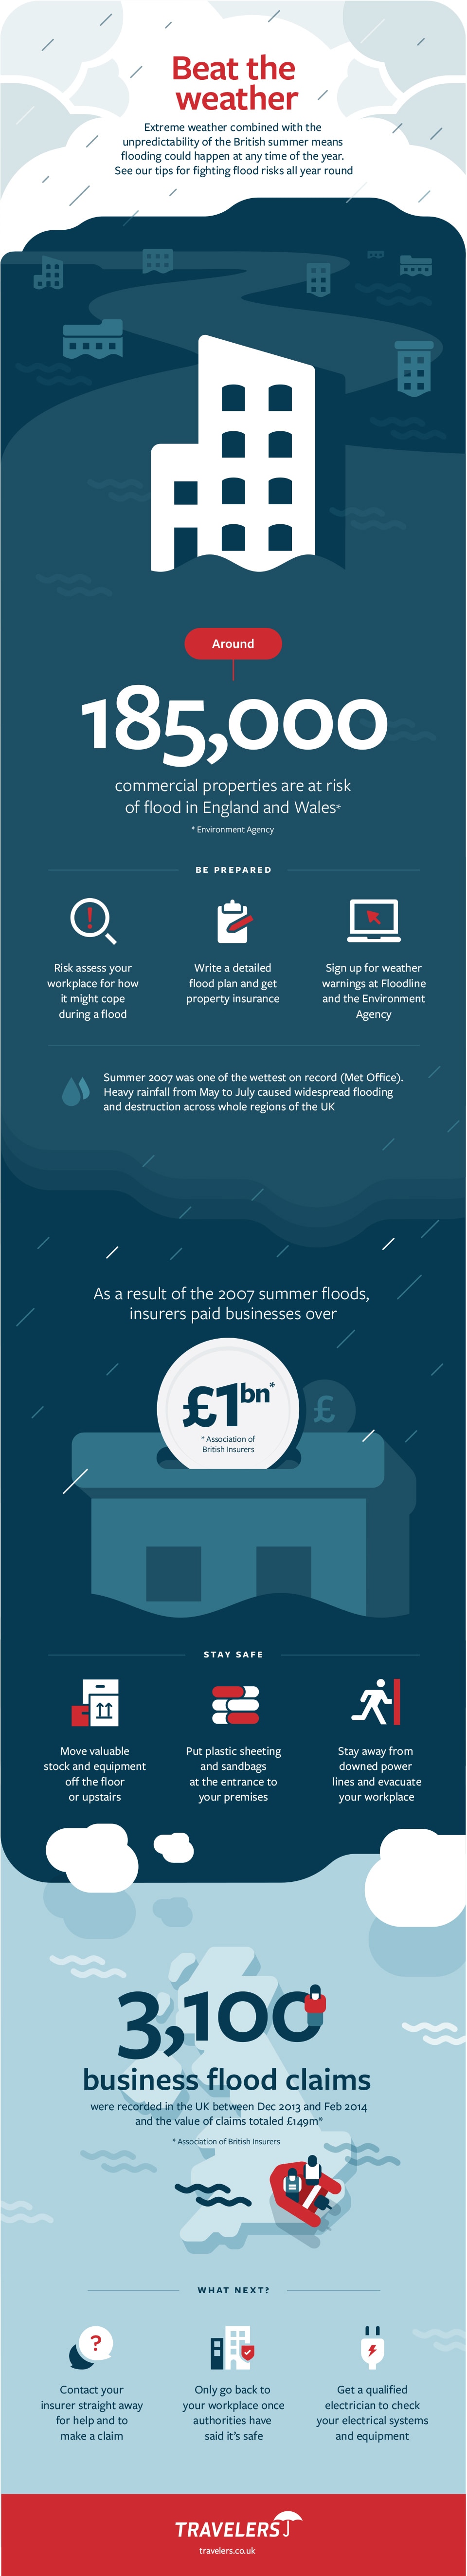 Beat the weather infographic